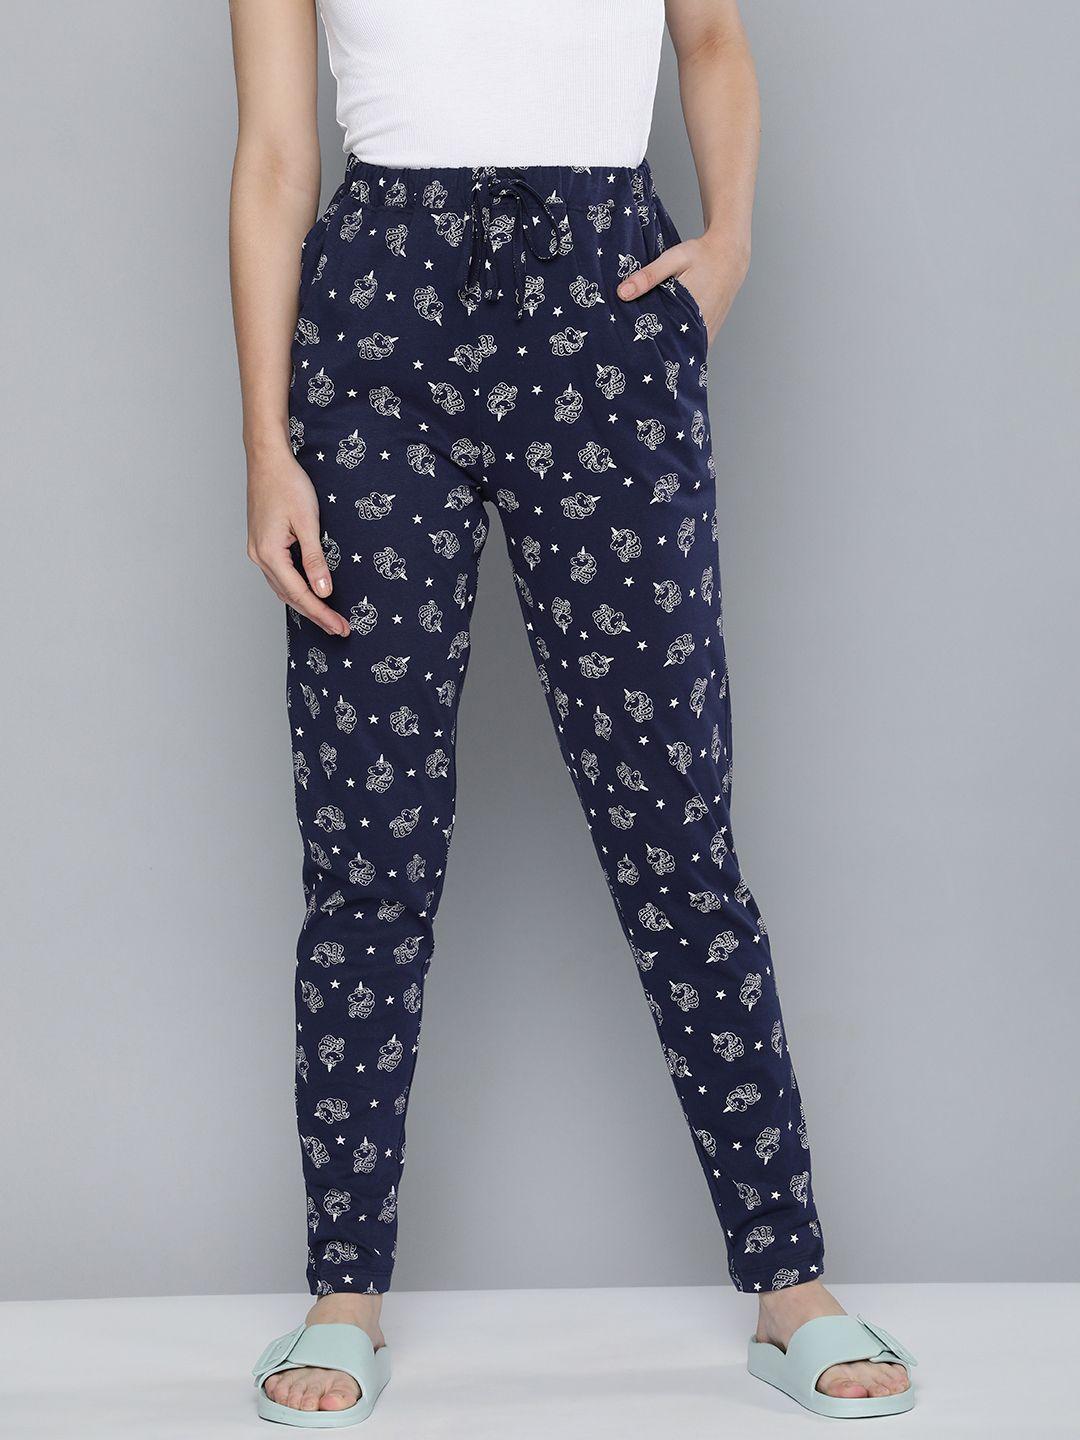 here&now women navy blue & white printed pure cotton lounge pants